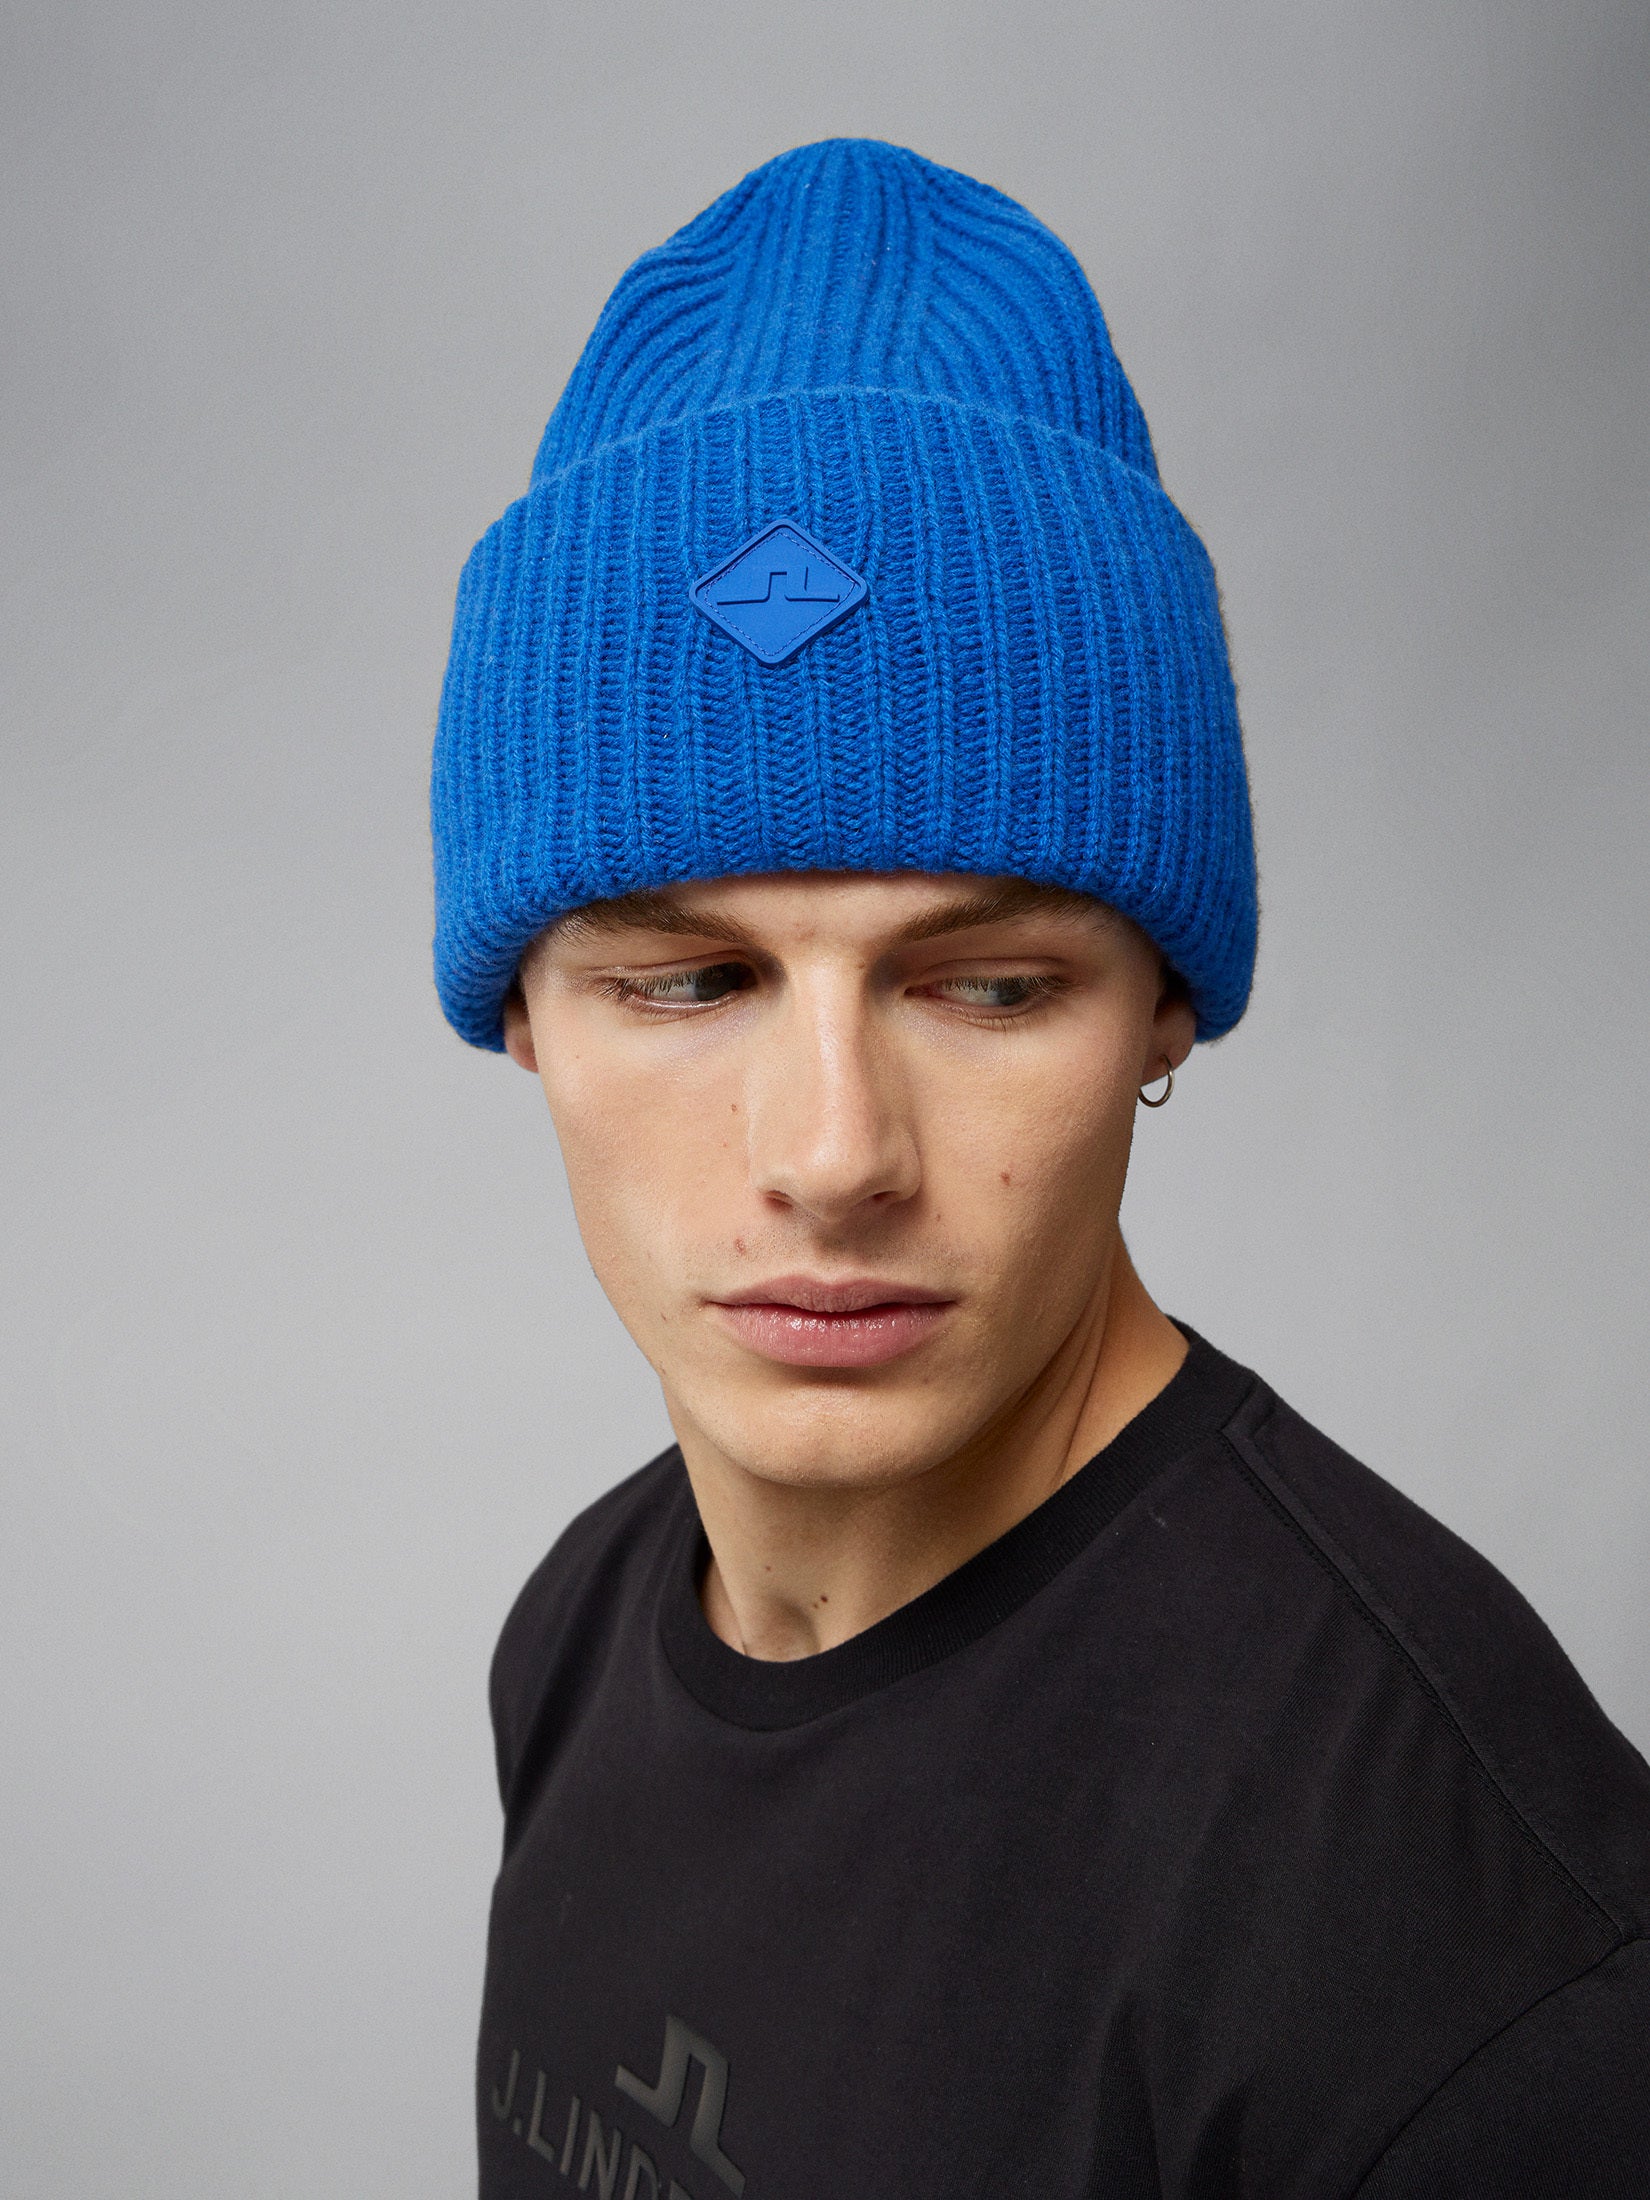 J.LINDEBERG Enso Knitted Beanie